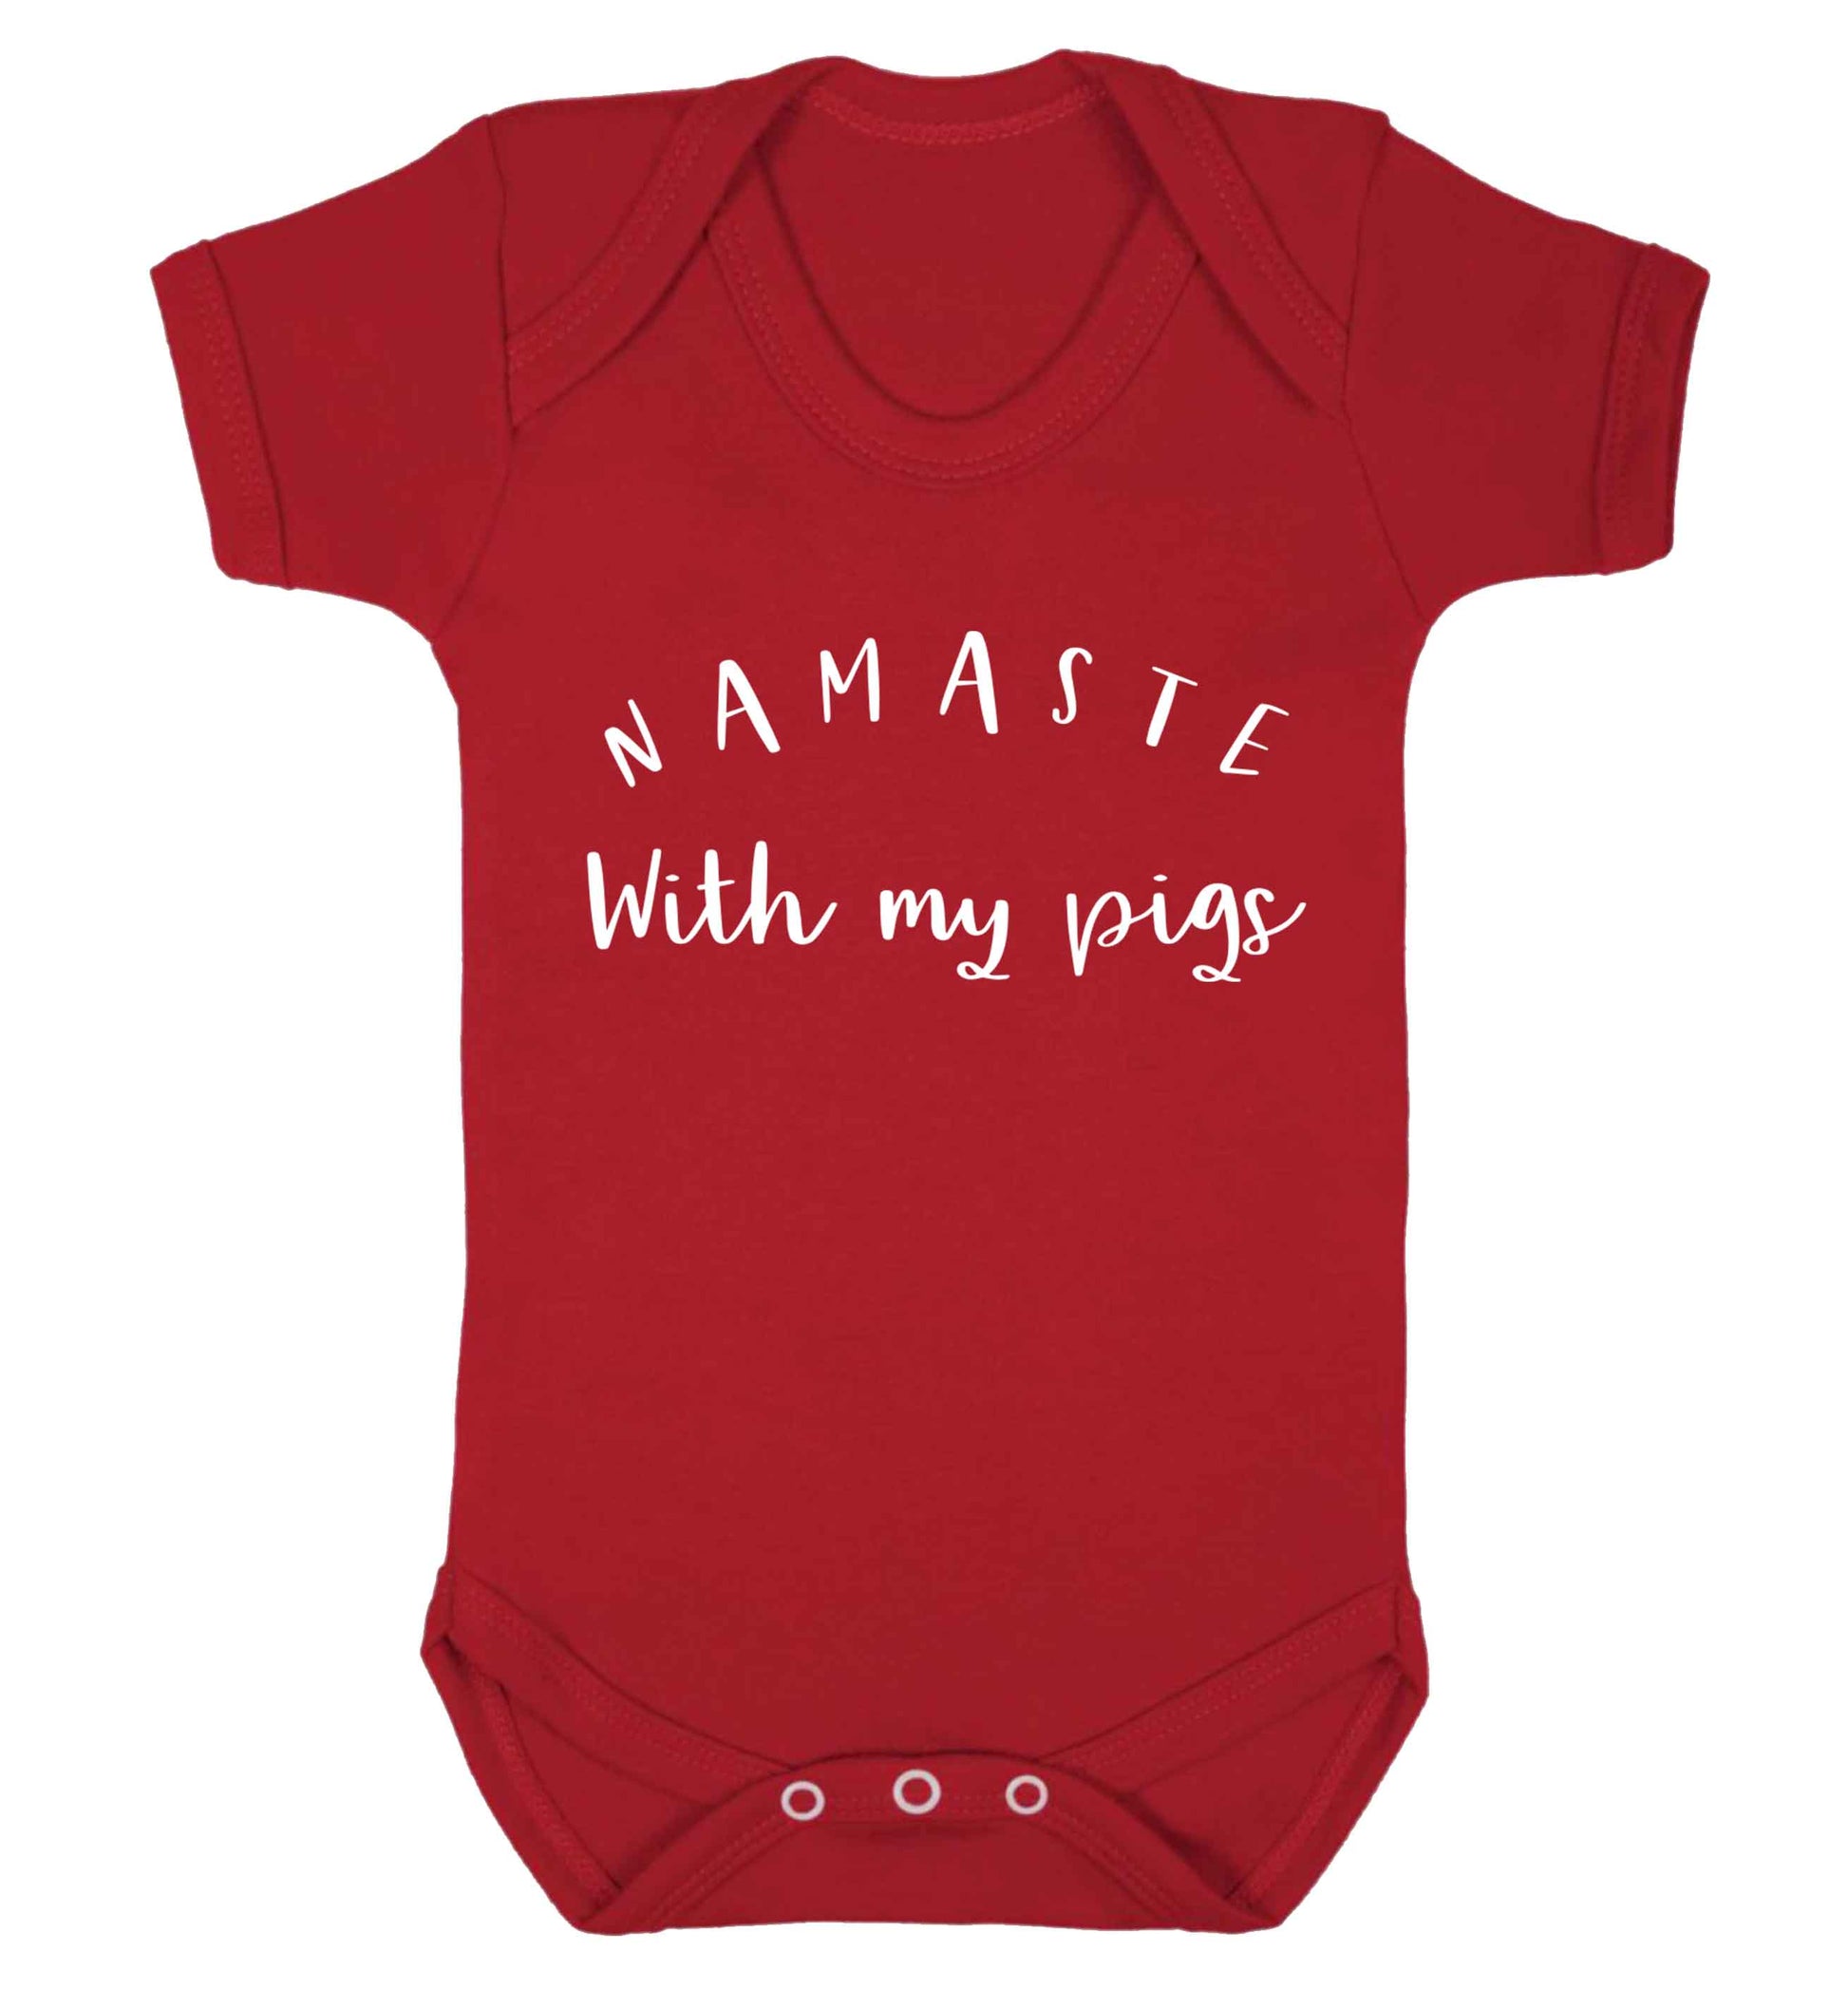 Namaste with my pigs Baby Vest red 18-24 months